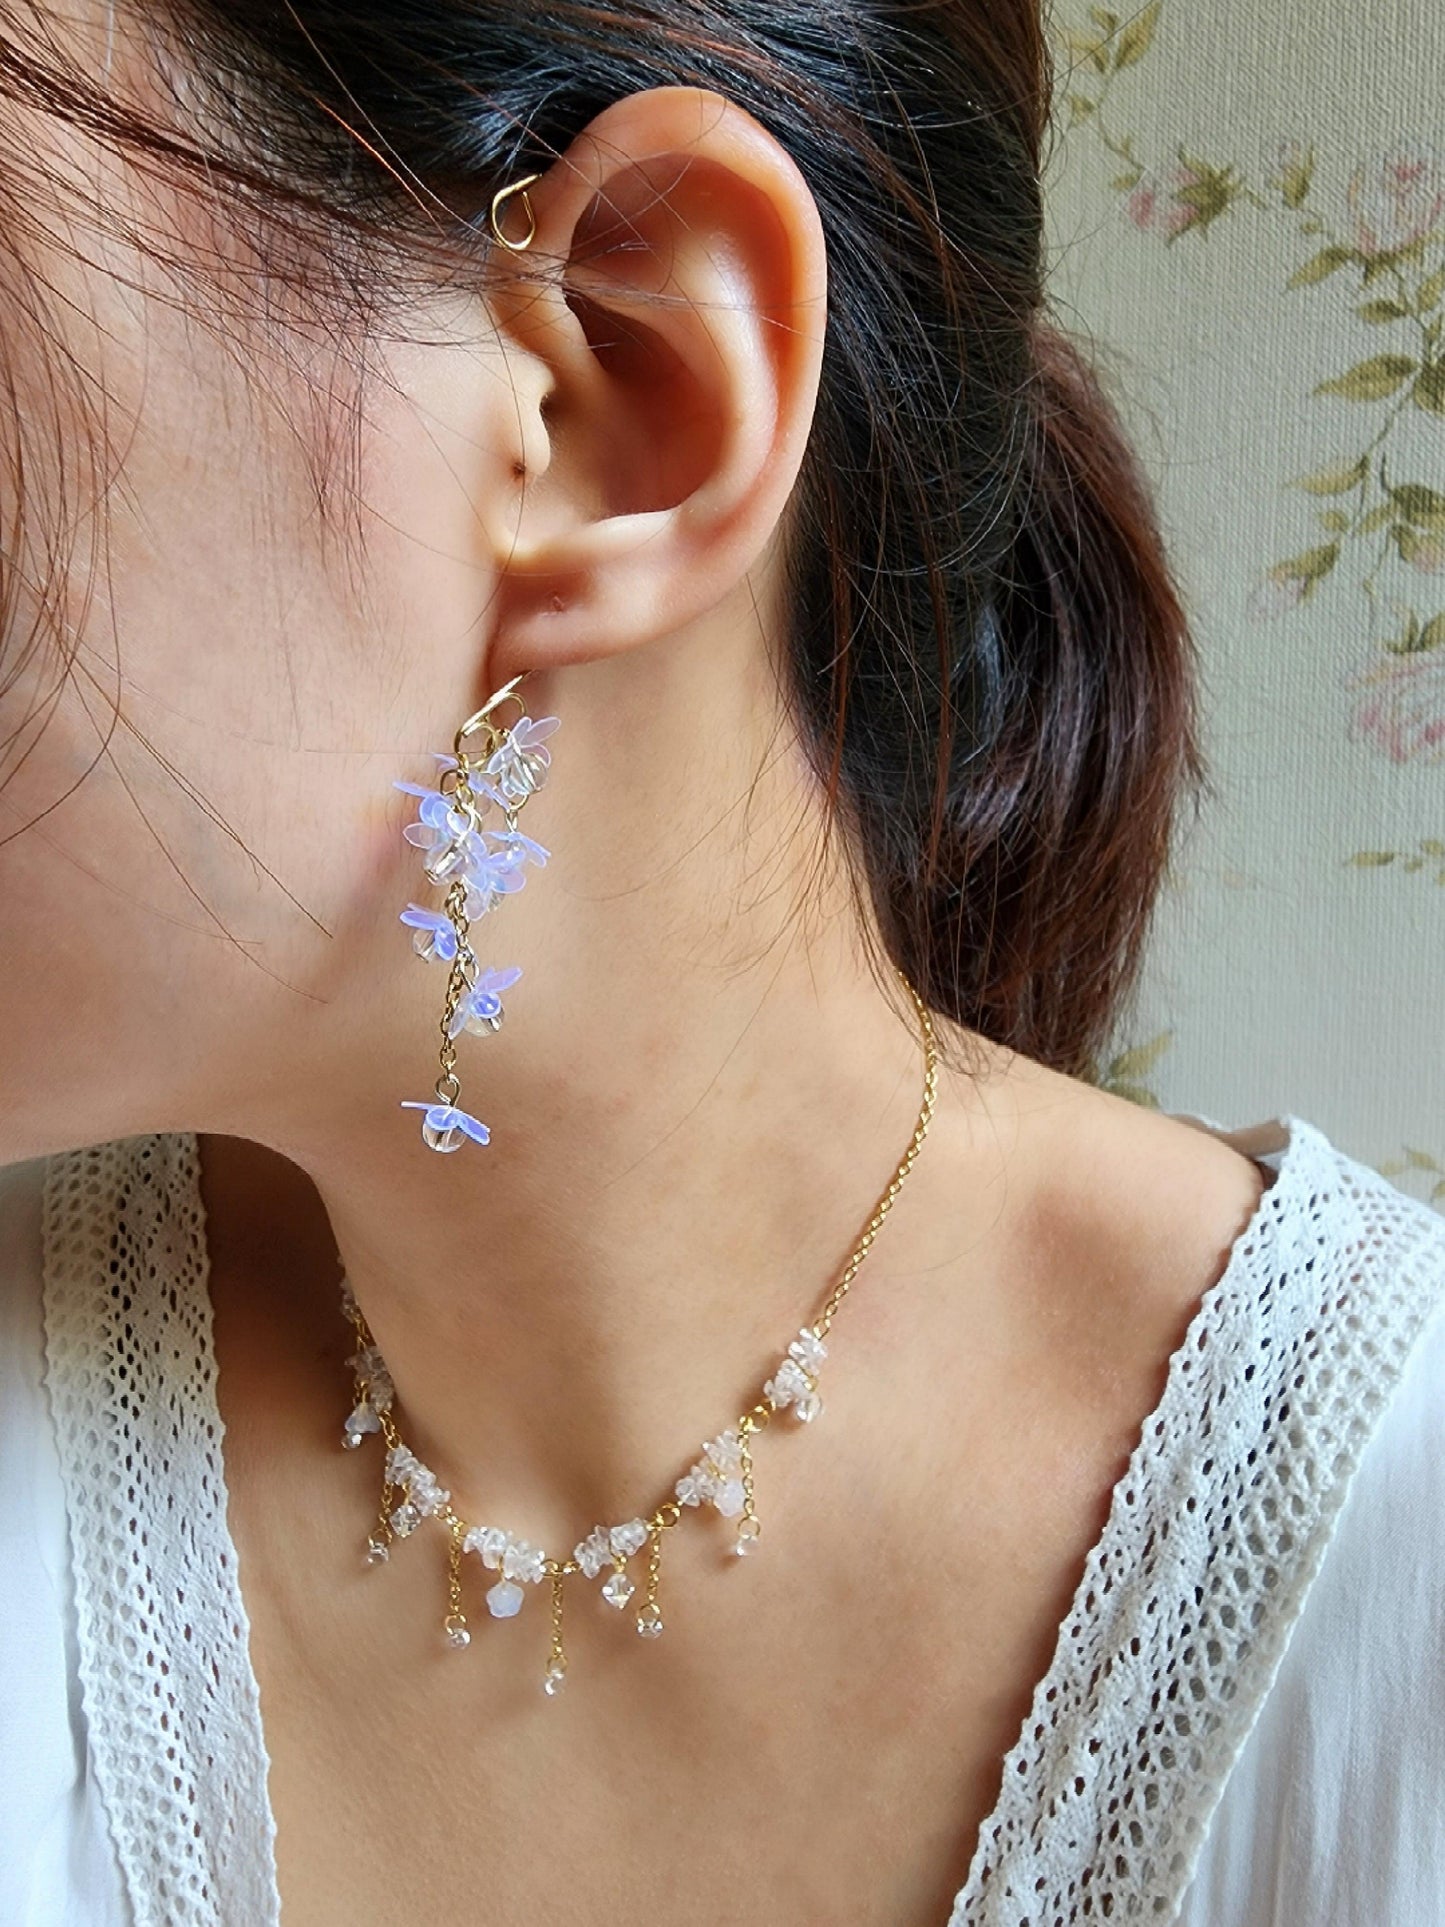 Iridescent Blossoms Earcuffs - By Cocoyu